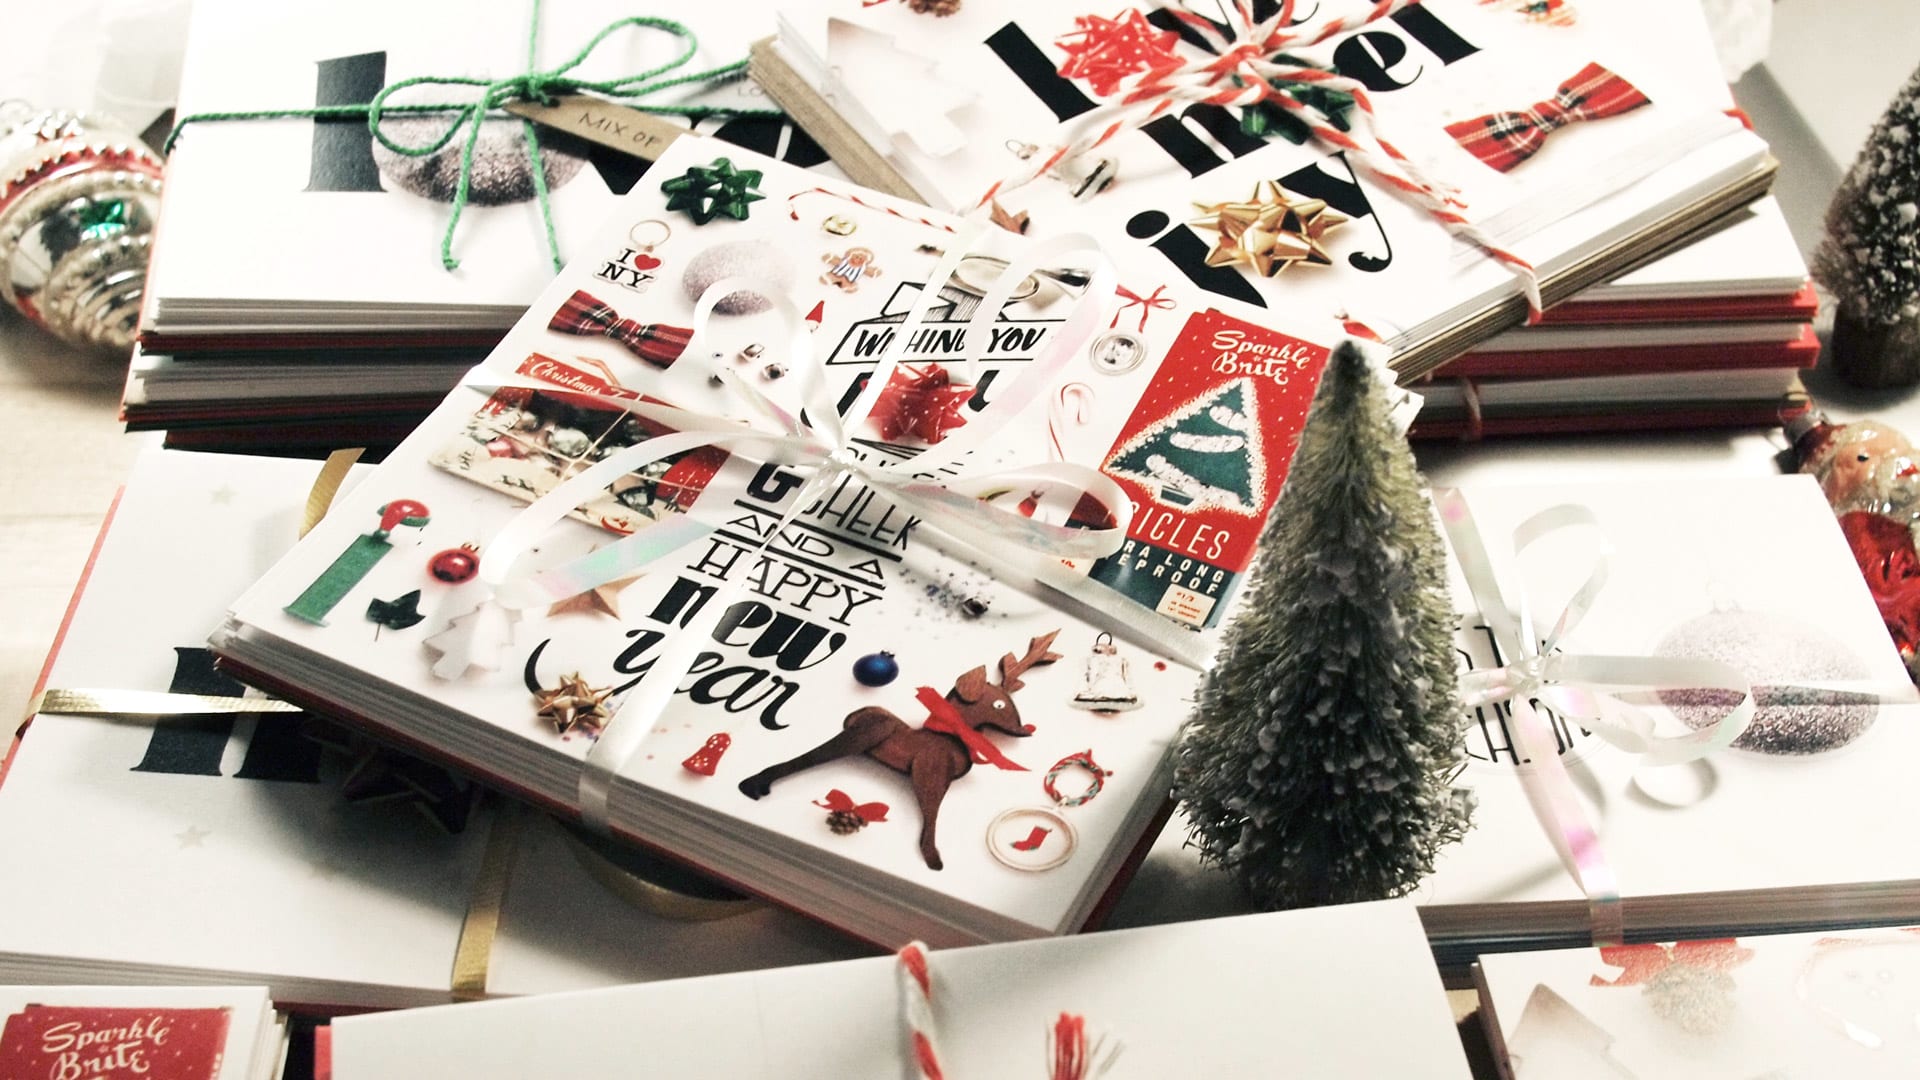 Is sending company holiday cards outdated? A guide from experts